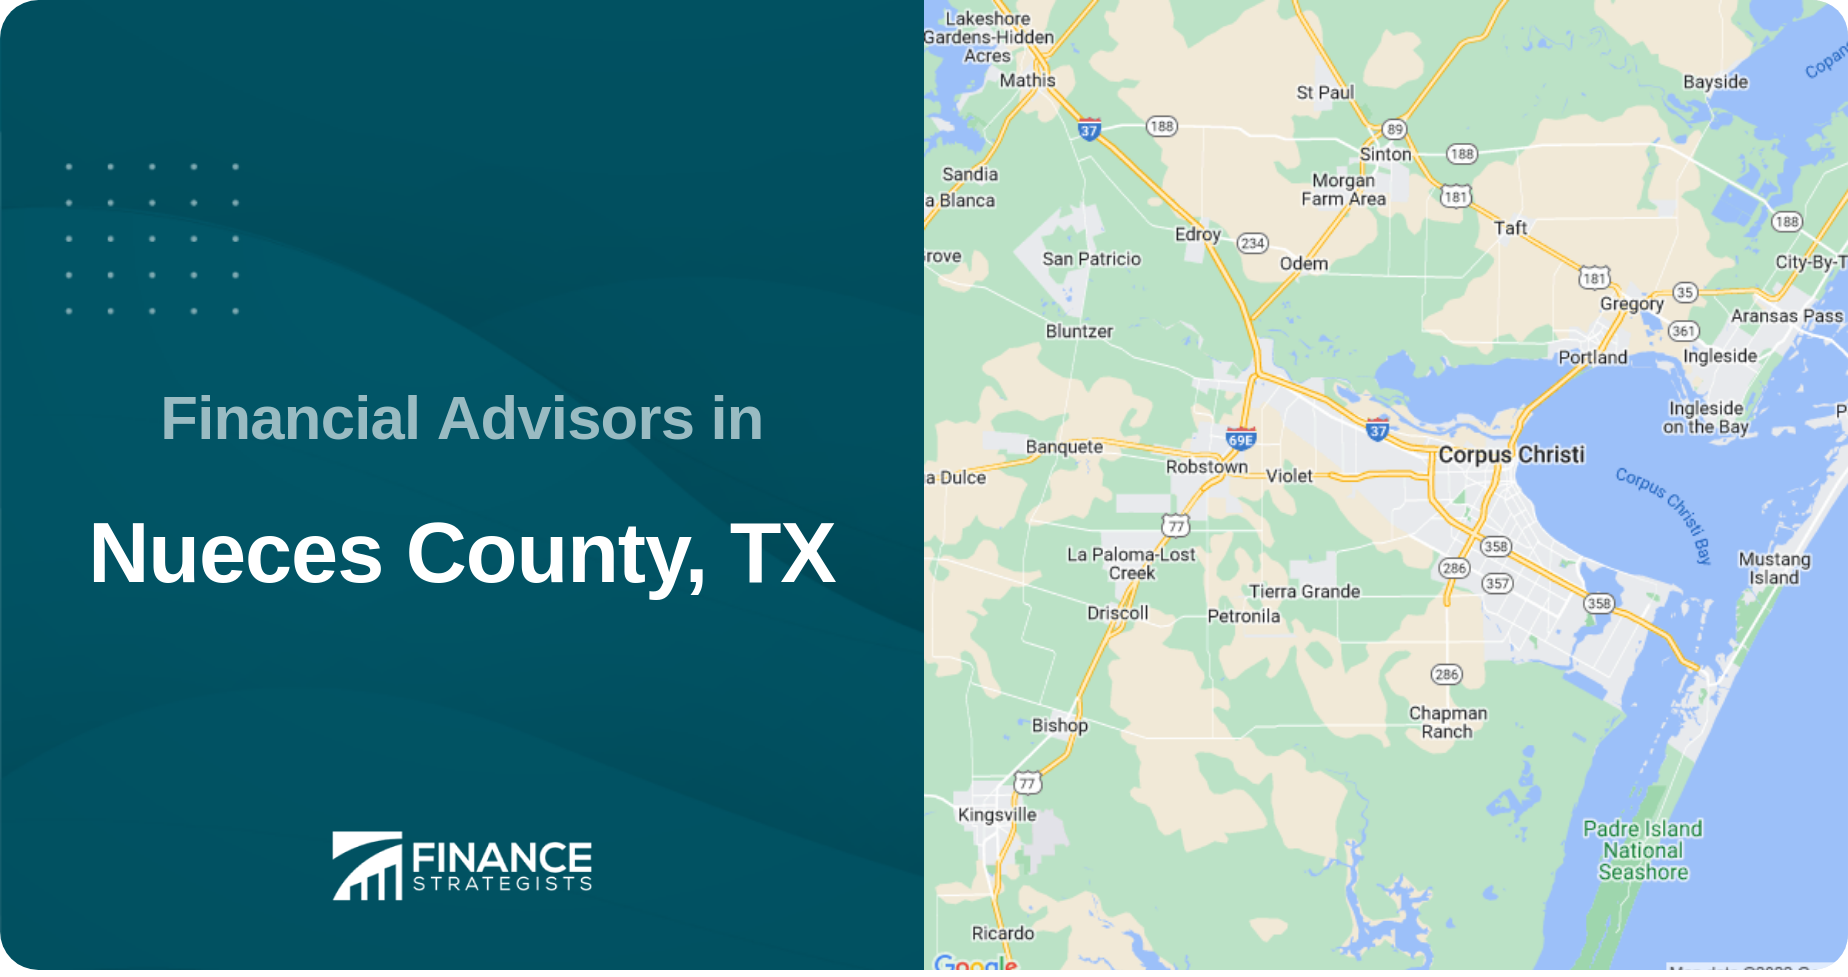 Financial Advisors in Nueces County, TX